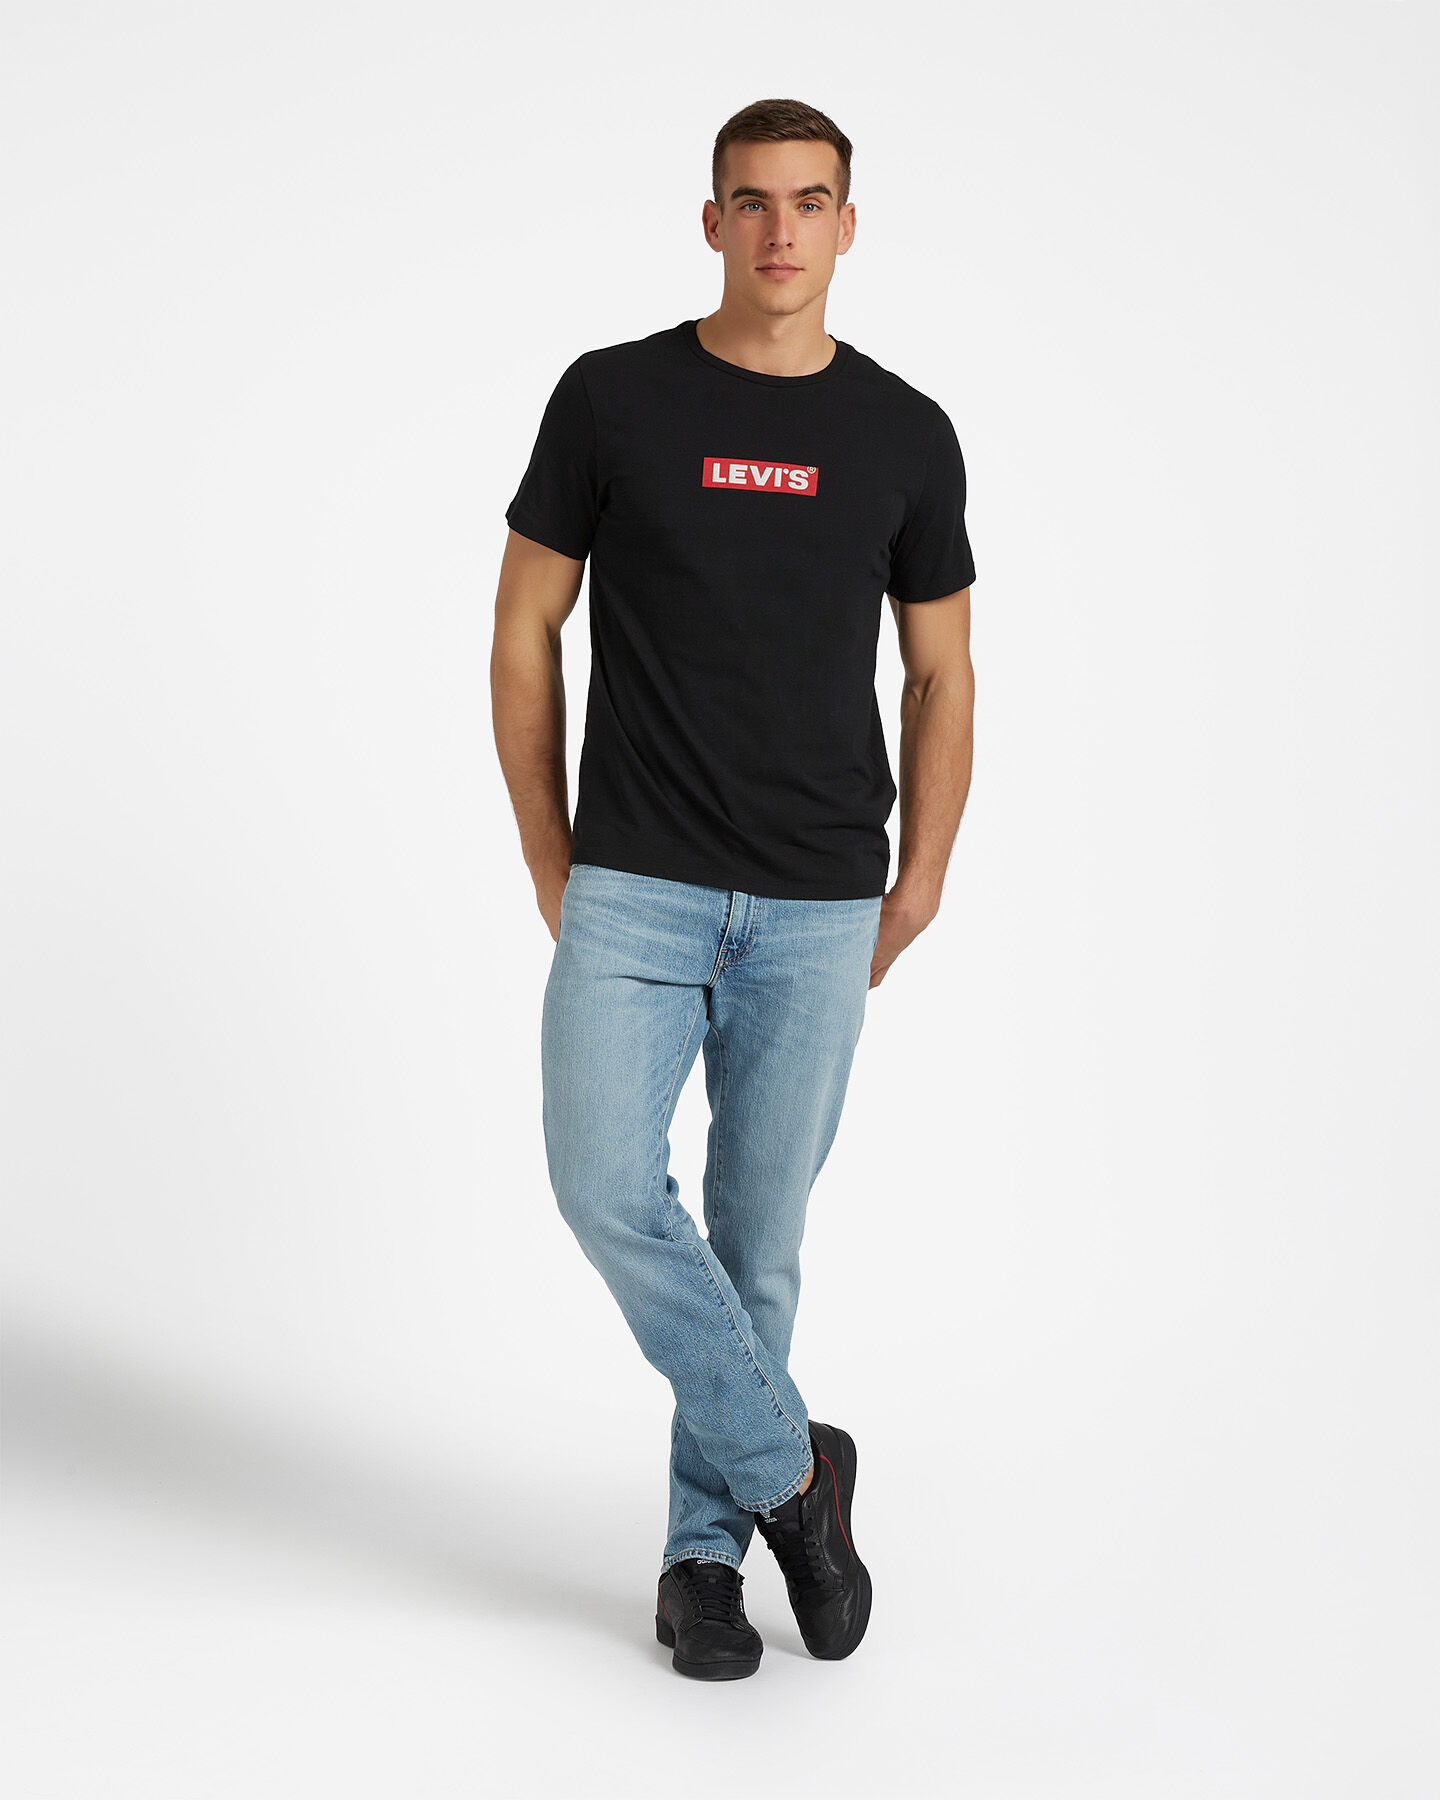  T-Shirt LEVI'S BOXTAB GRAPHIC M S4076920|002|XS scatto 1